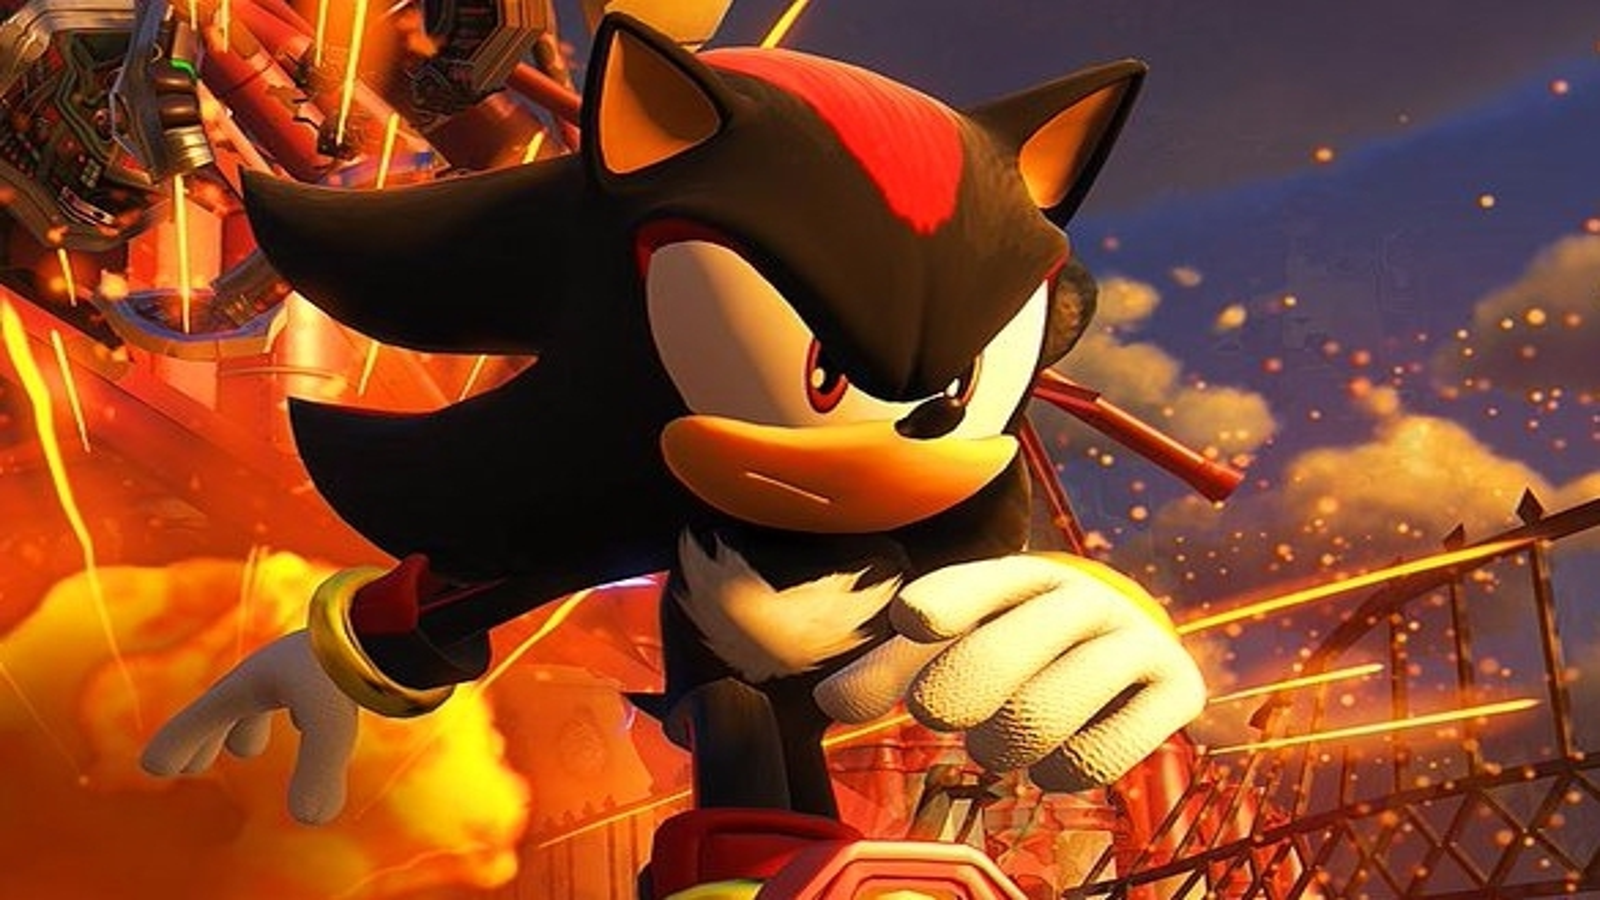 Sonic Forces Gameplay Video Focuses on Free Shadow DLC